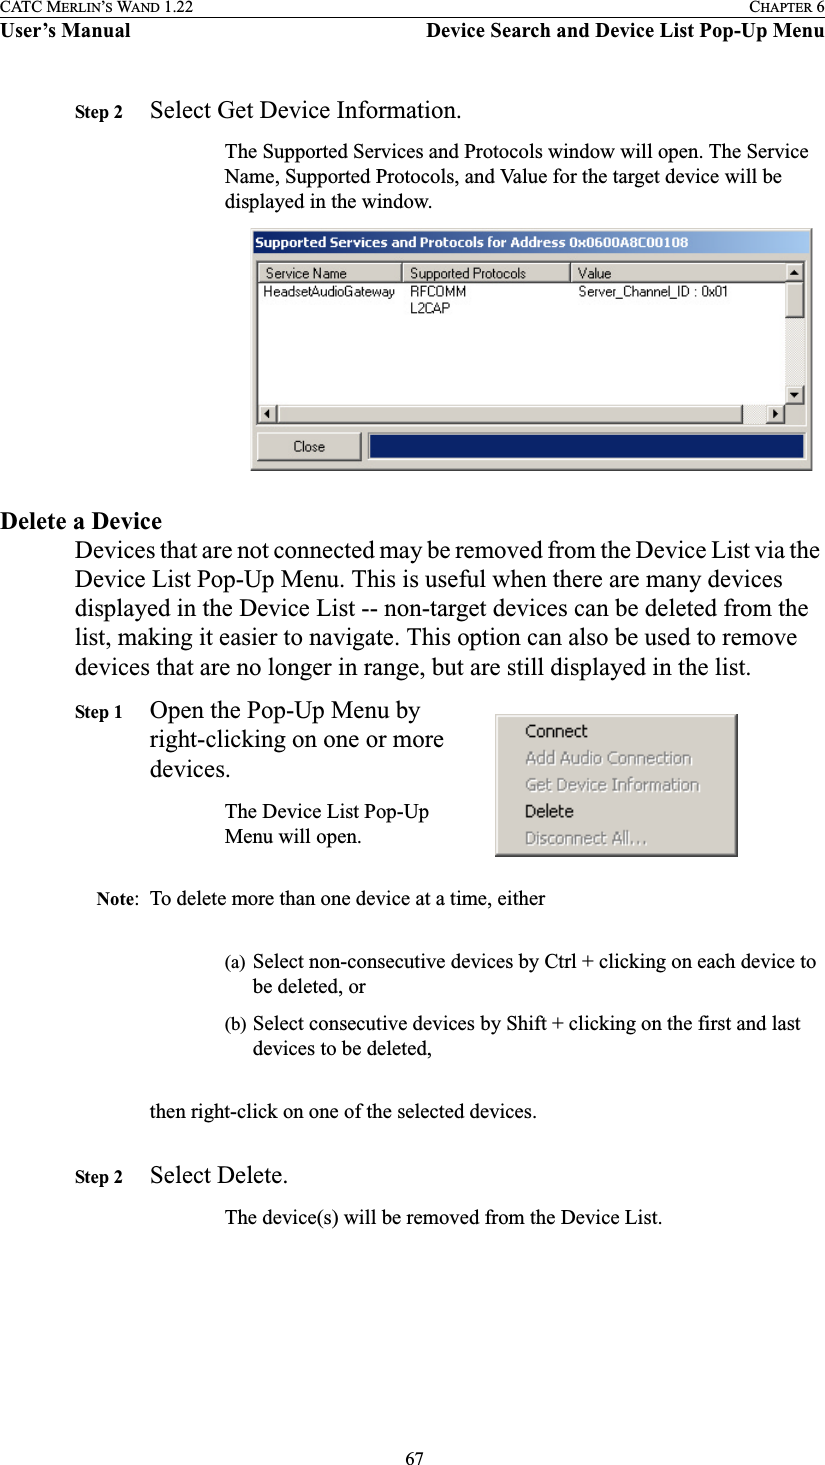  67CATC MERLIN’S WAND 1.22 CHAPTER 6User’s Manual Device Search and Device List Pop-Up MenuStep 2 Select Get Device Information.The Supported Services and Protocols window will open. The Service Name, Supported Protocols, and Value for the target device will be displayed in the window.Delete a DeviceDevices that are not connected may be removed from the Device List via the Device List Pop-Up Menu. This is useful when there are many devices displayed in the Device List -- non-target devices can be deleted from the list, making it easier to navigate. This option can also be used to remove devices that are no longer in range, but are still displayed in the list.Step 1 Open the Pop-Up Menu by right-clicking on one or more devices.The Device List Pop-Up Menu will open.Note: To delete more than one device at a time, either(a) Select non-consecutive devices by Ctrl + clicking on each device to be deleted, or(b) Select consecutive devices by Shift + clicking on the first and last devices to be deleted,then right-click on one of the selected devices.Step 2 Select Delete.The device(s) will be removed from the Device List.